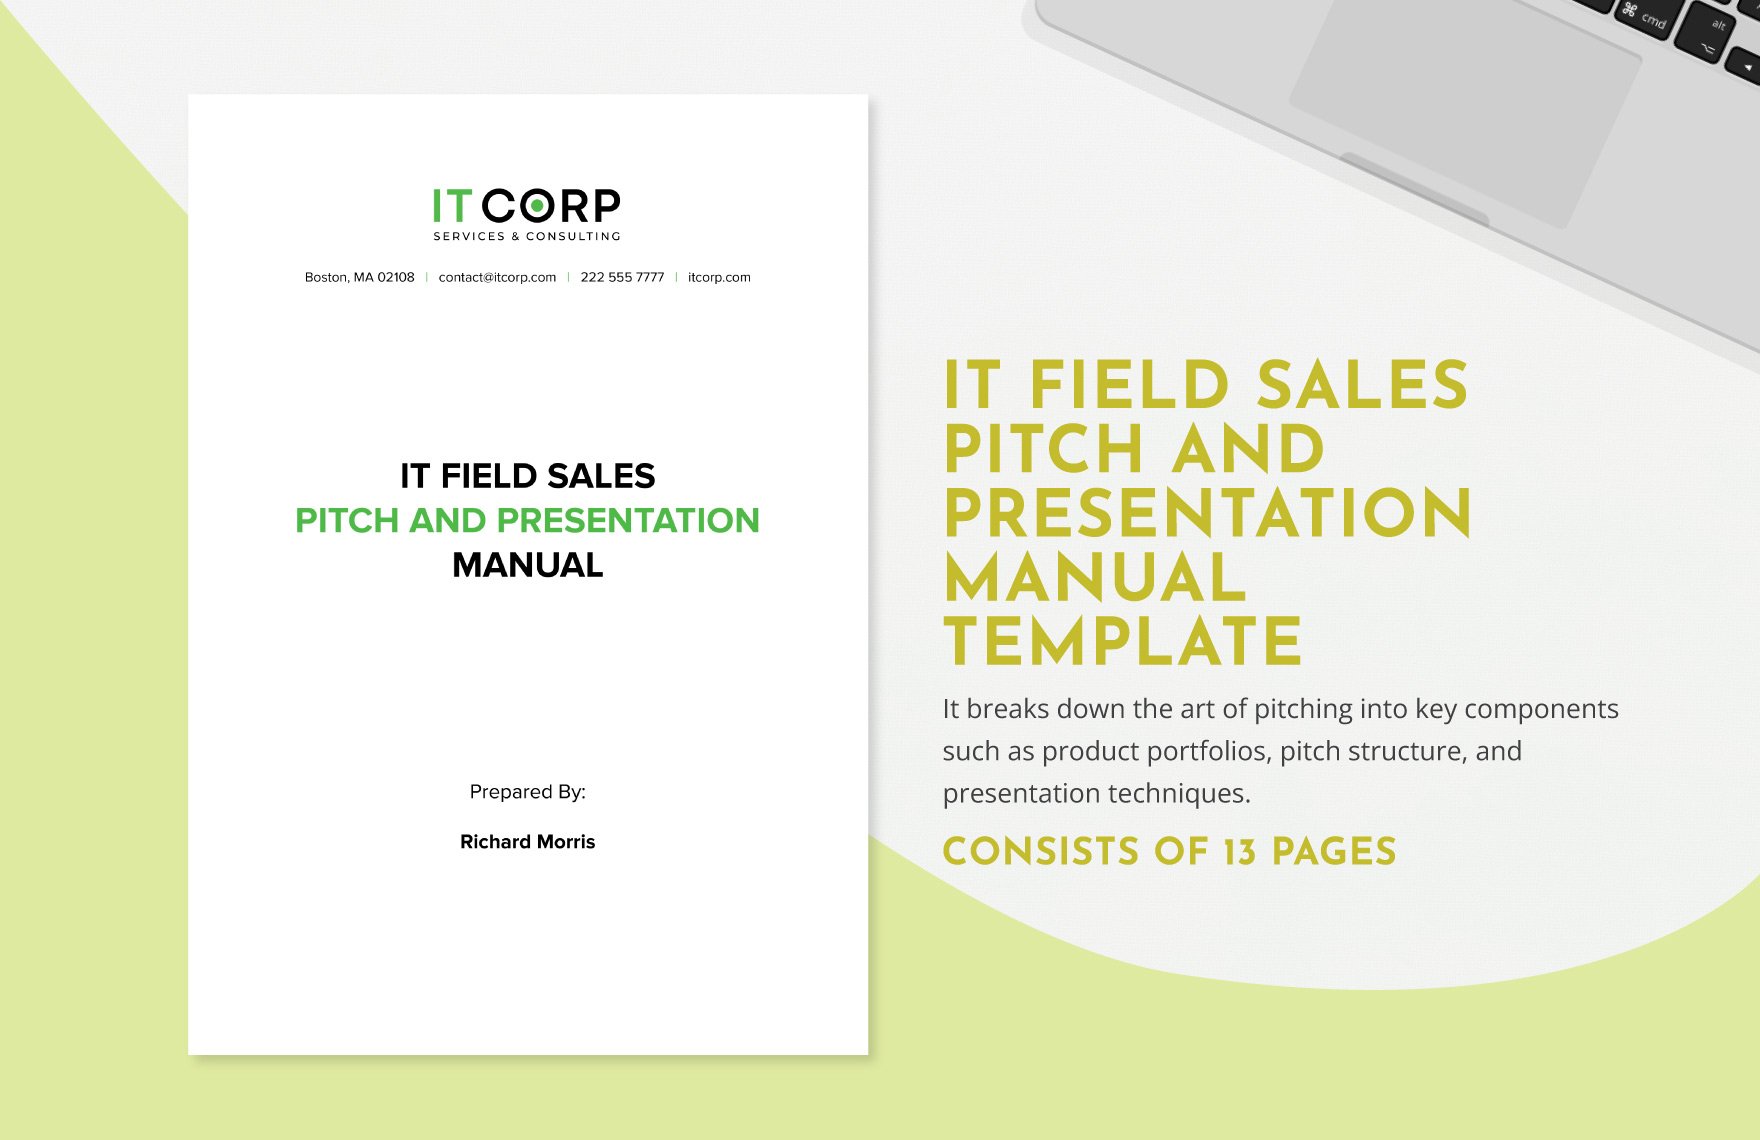 IT Field Sales Pitch and Presentation Manual Template in Word, Google Docs, PDF